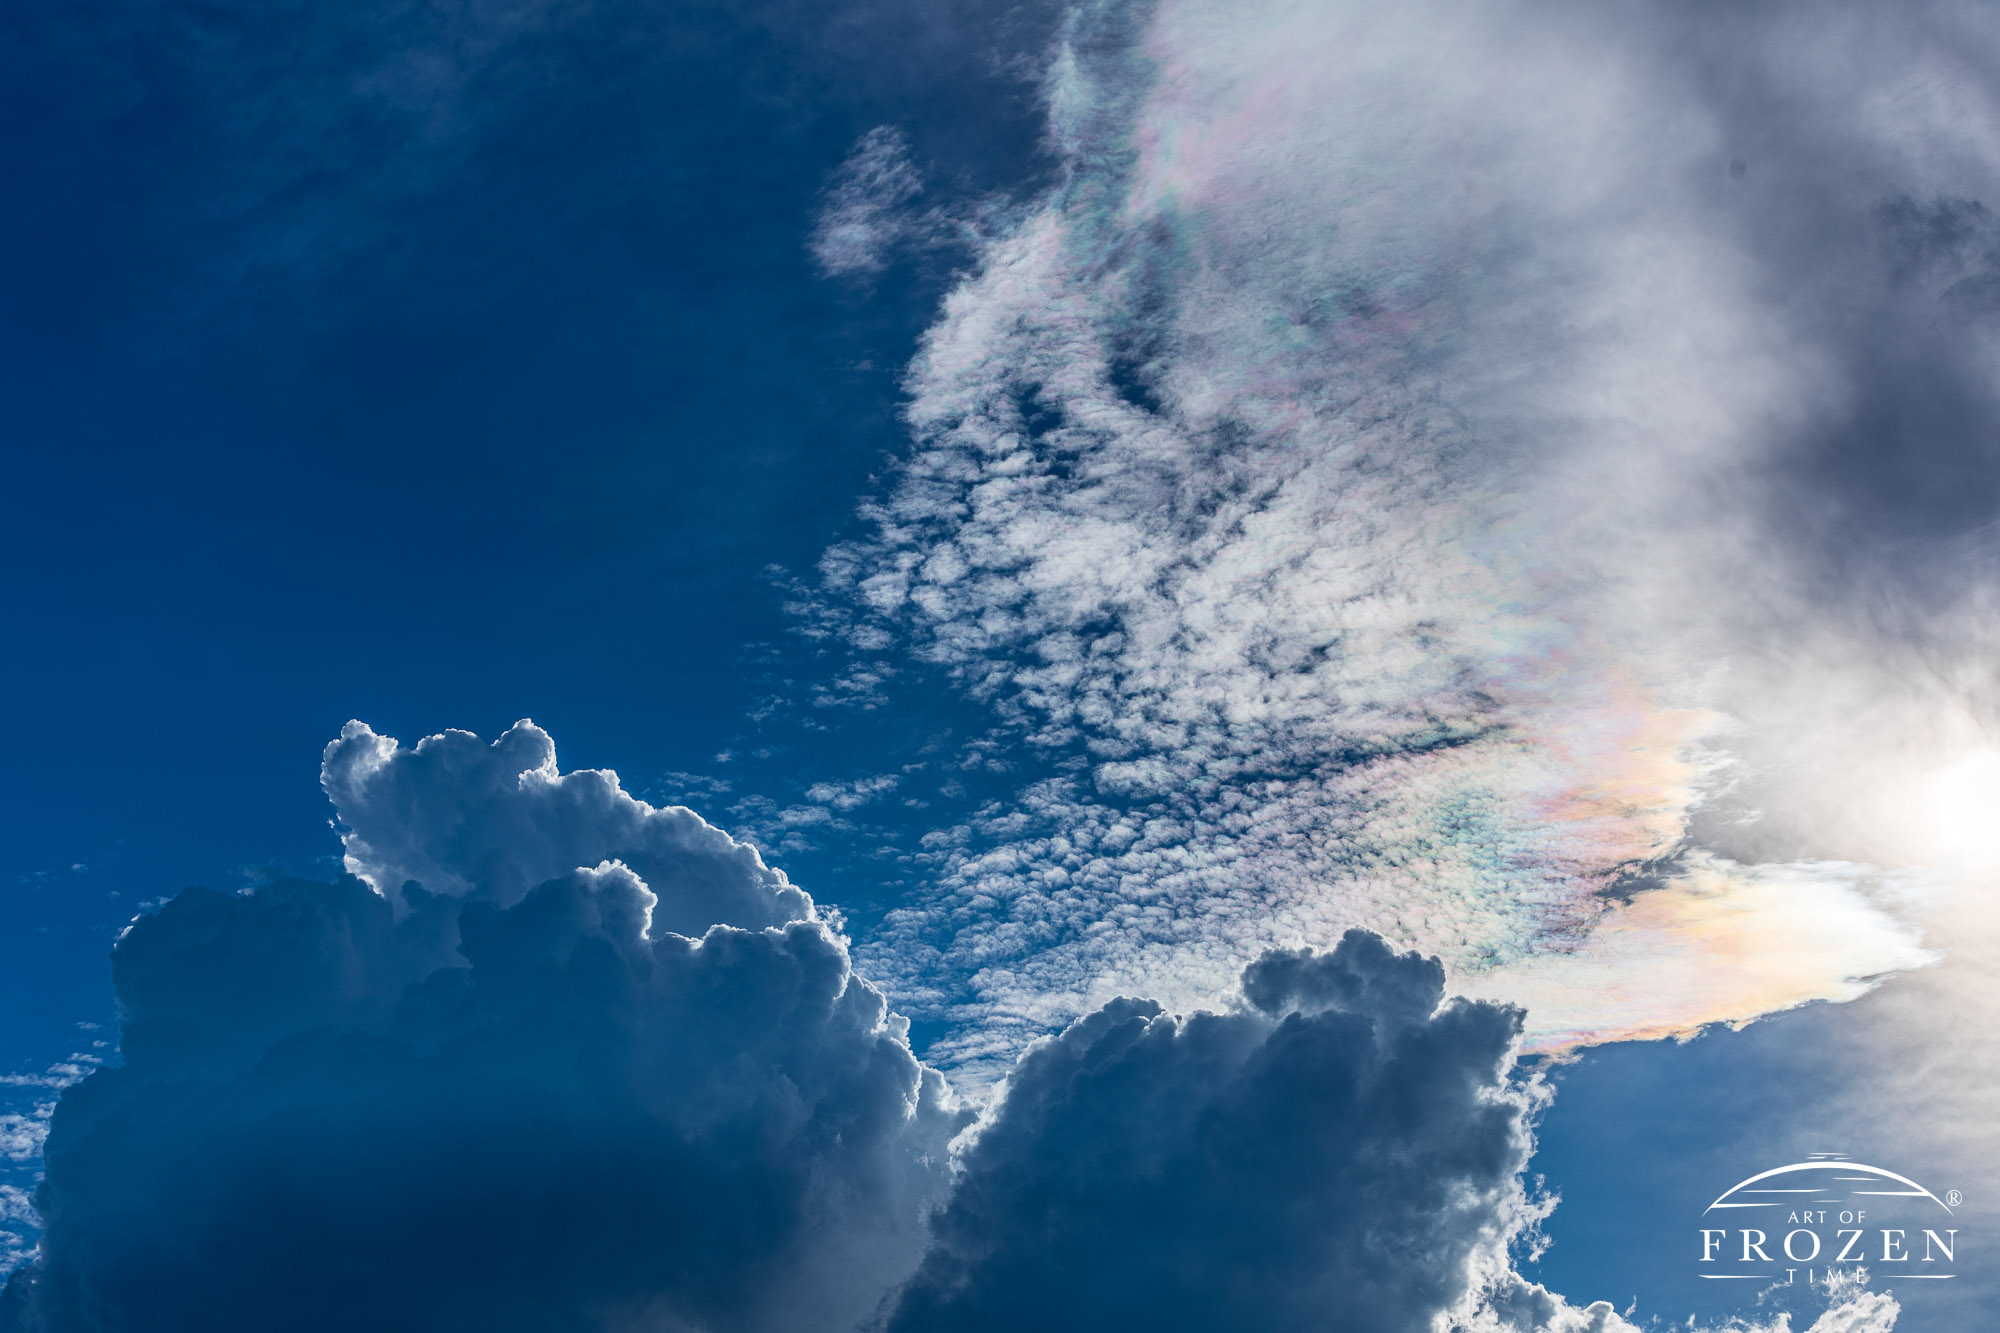 An interesting cloudscape where cirrus clouds refract light in colorful ways as lower rain clouds transition to thunderstorms.